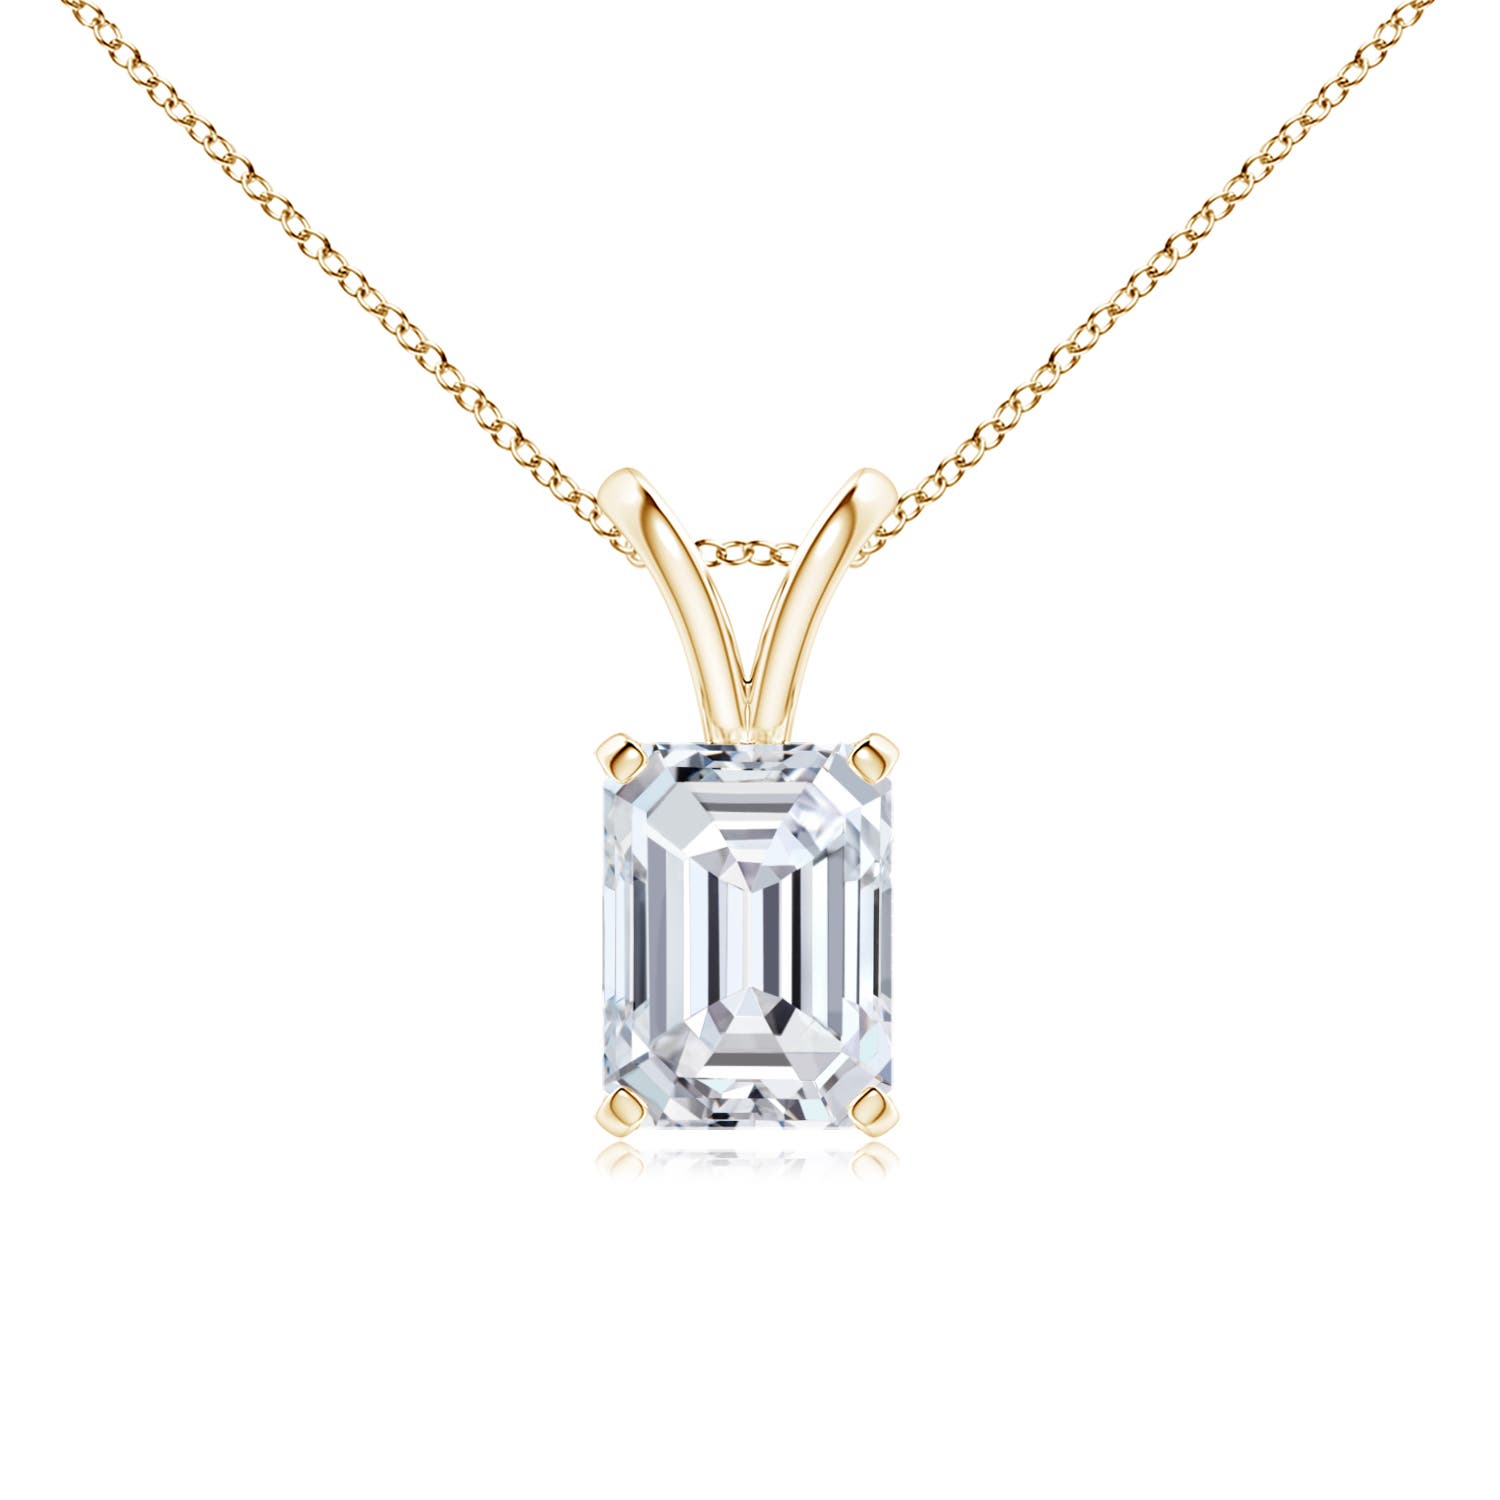 H, SI2 / 1.5 CT / 14 KT Yellow Gold